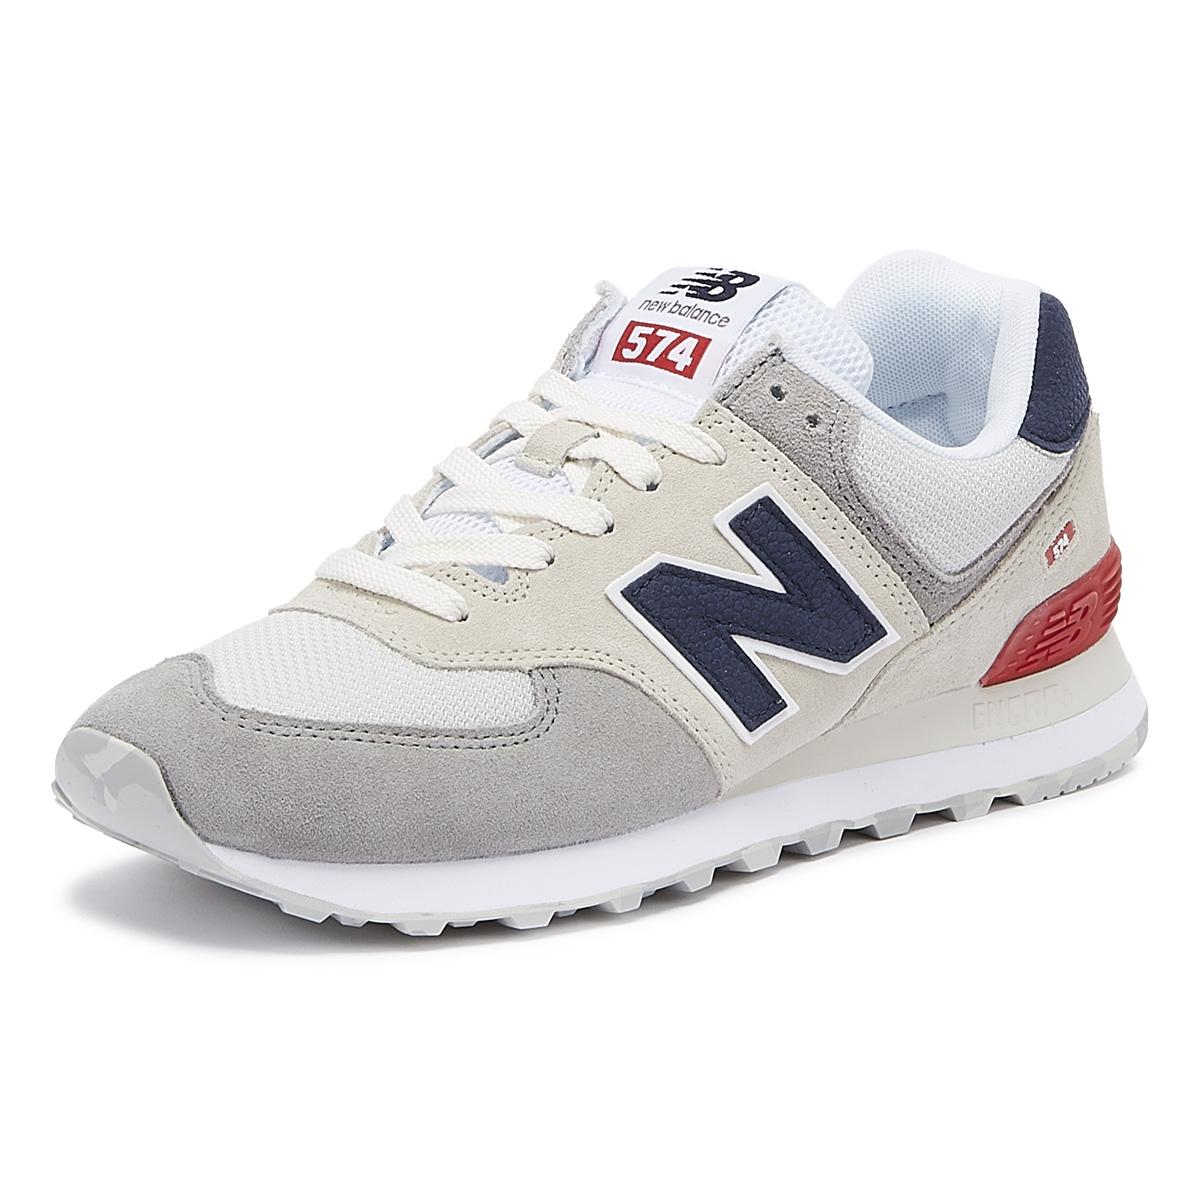 New Balance Suede 574 Mens Grey / Navy Trainers in Gray for Men - Lyst